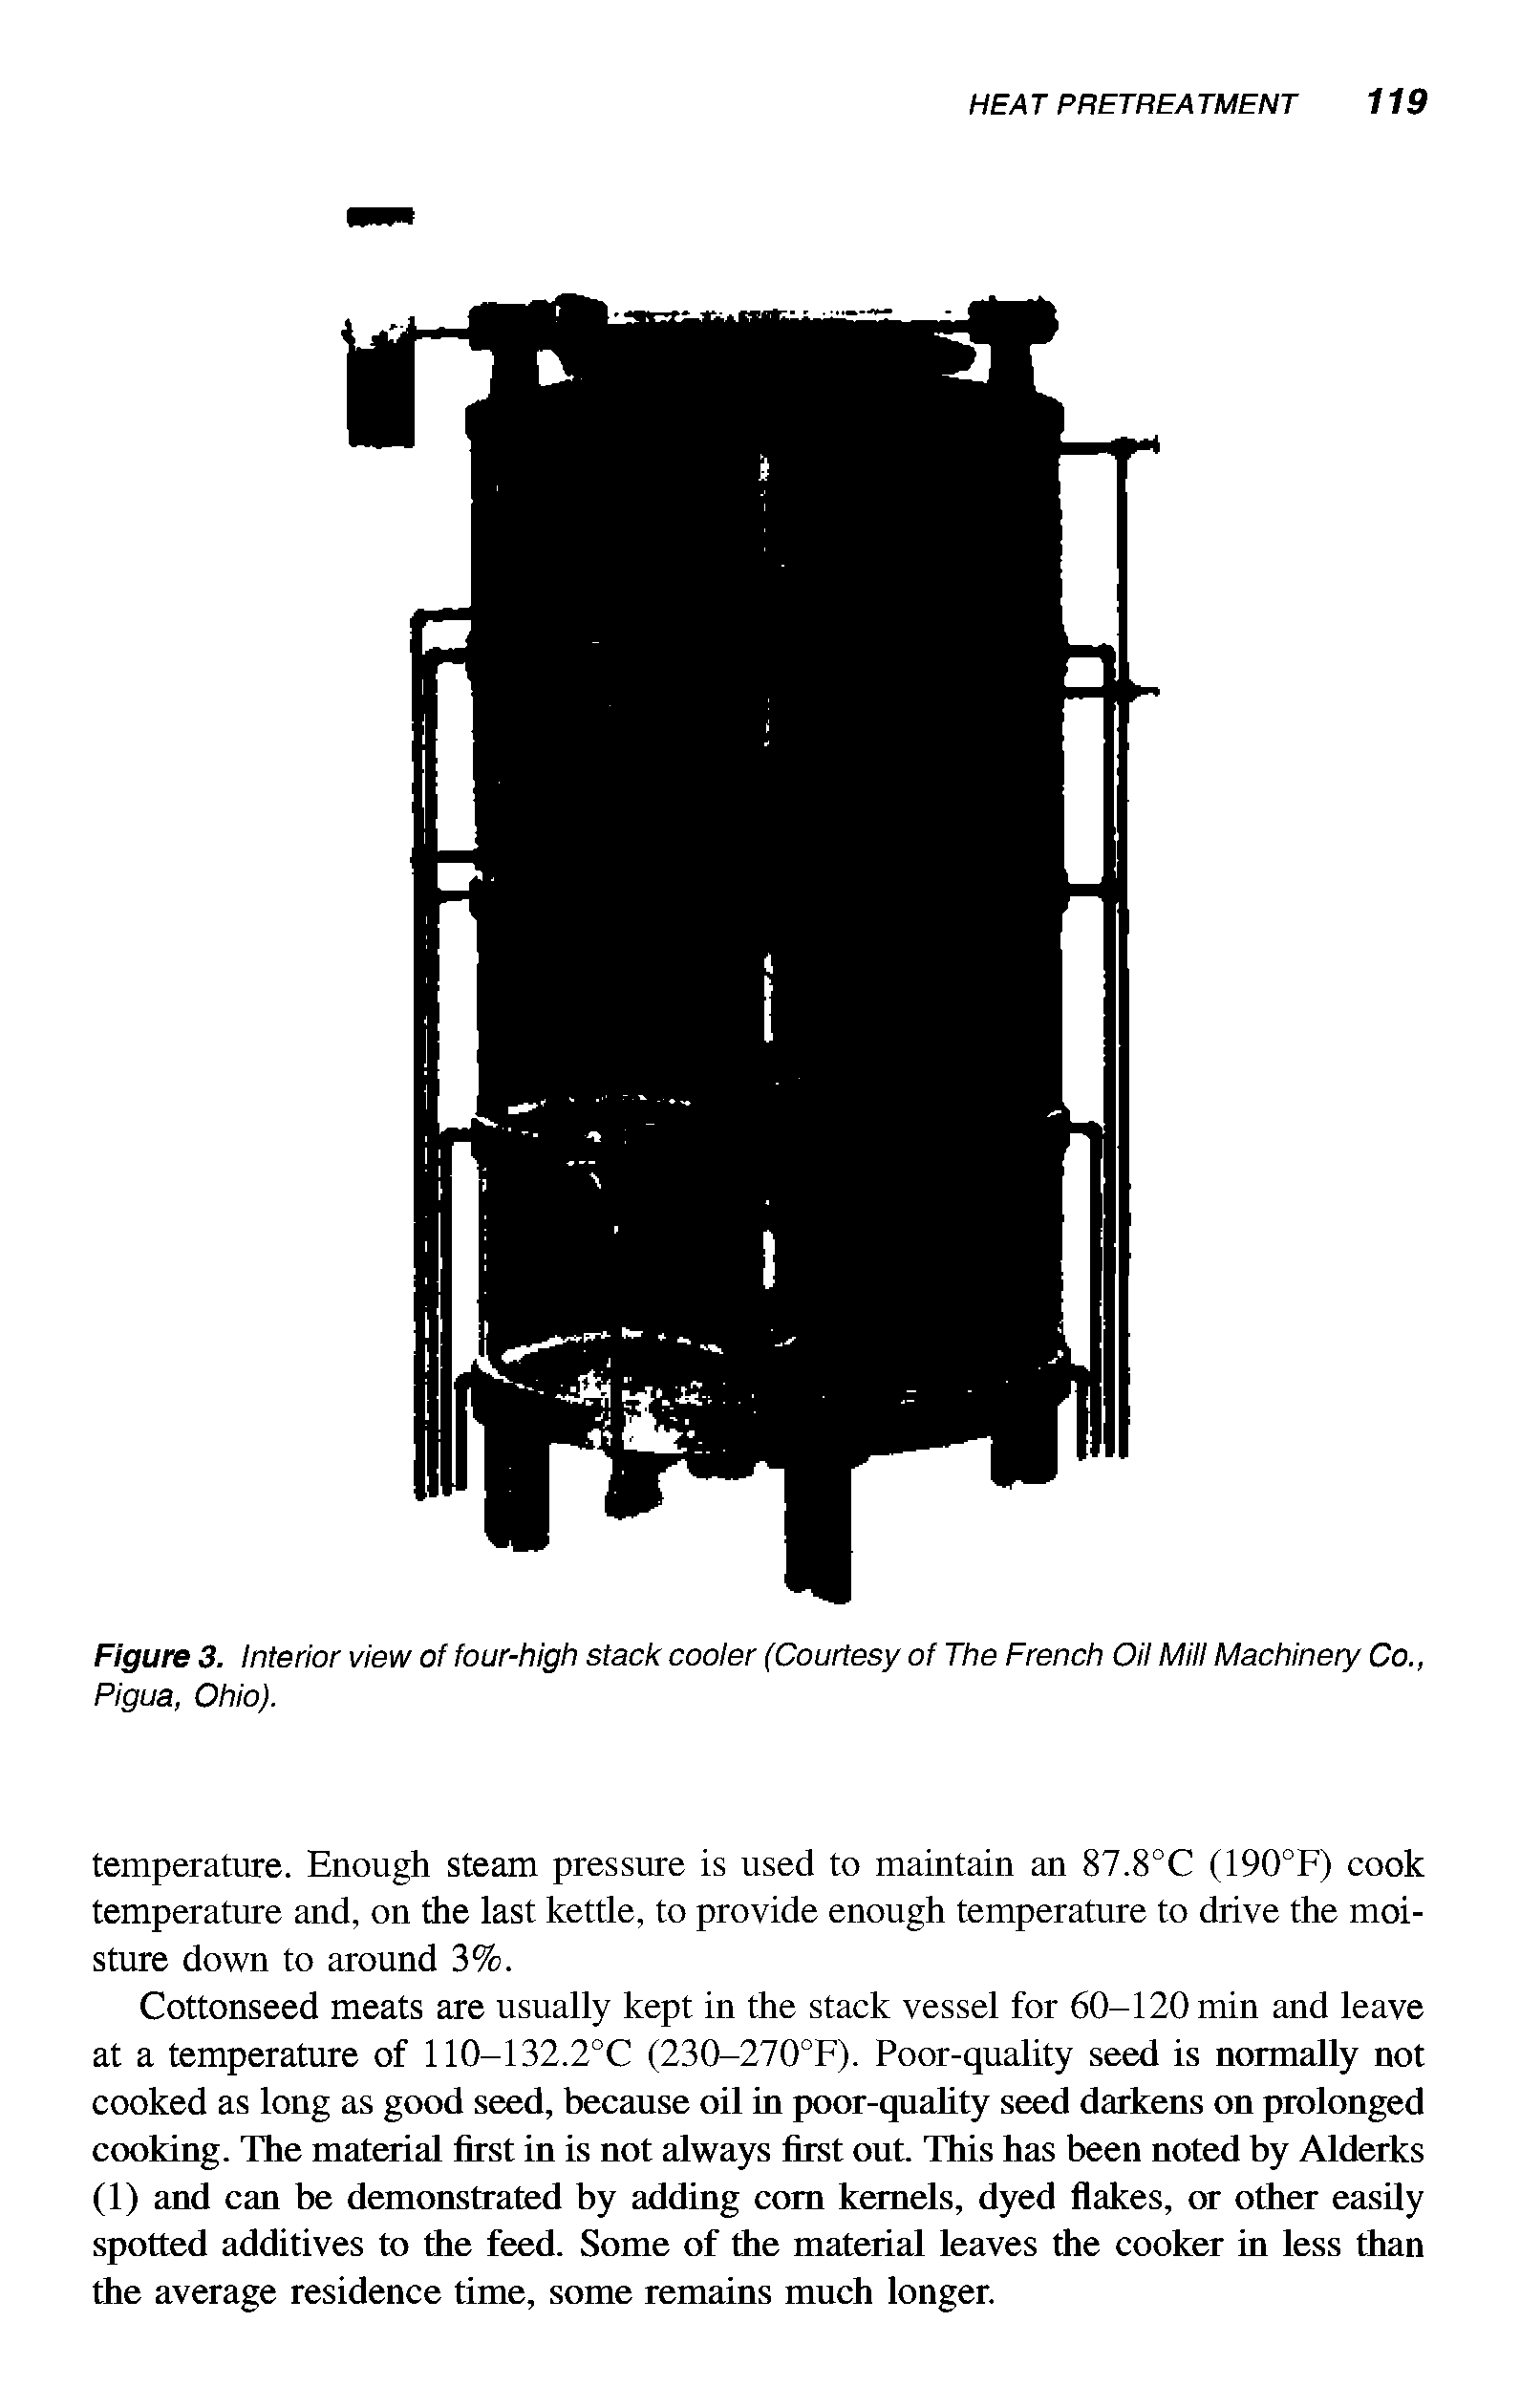 Figure 3. Interior view of four-high stack cooler (Courtesy of The French Oil Mill Machinery Co., Pigua, Ohio).